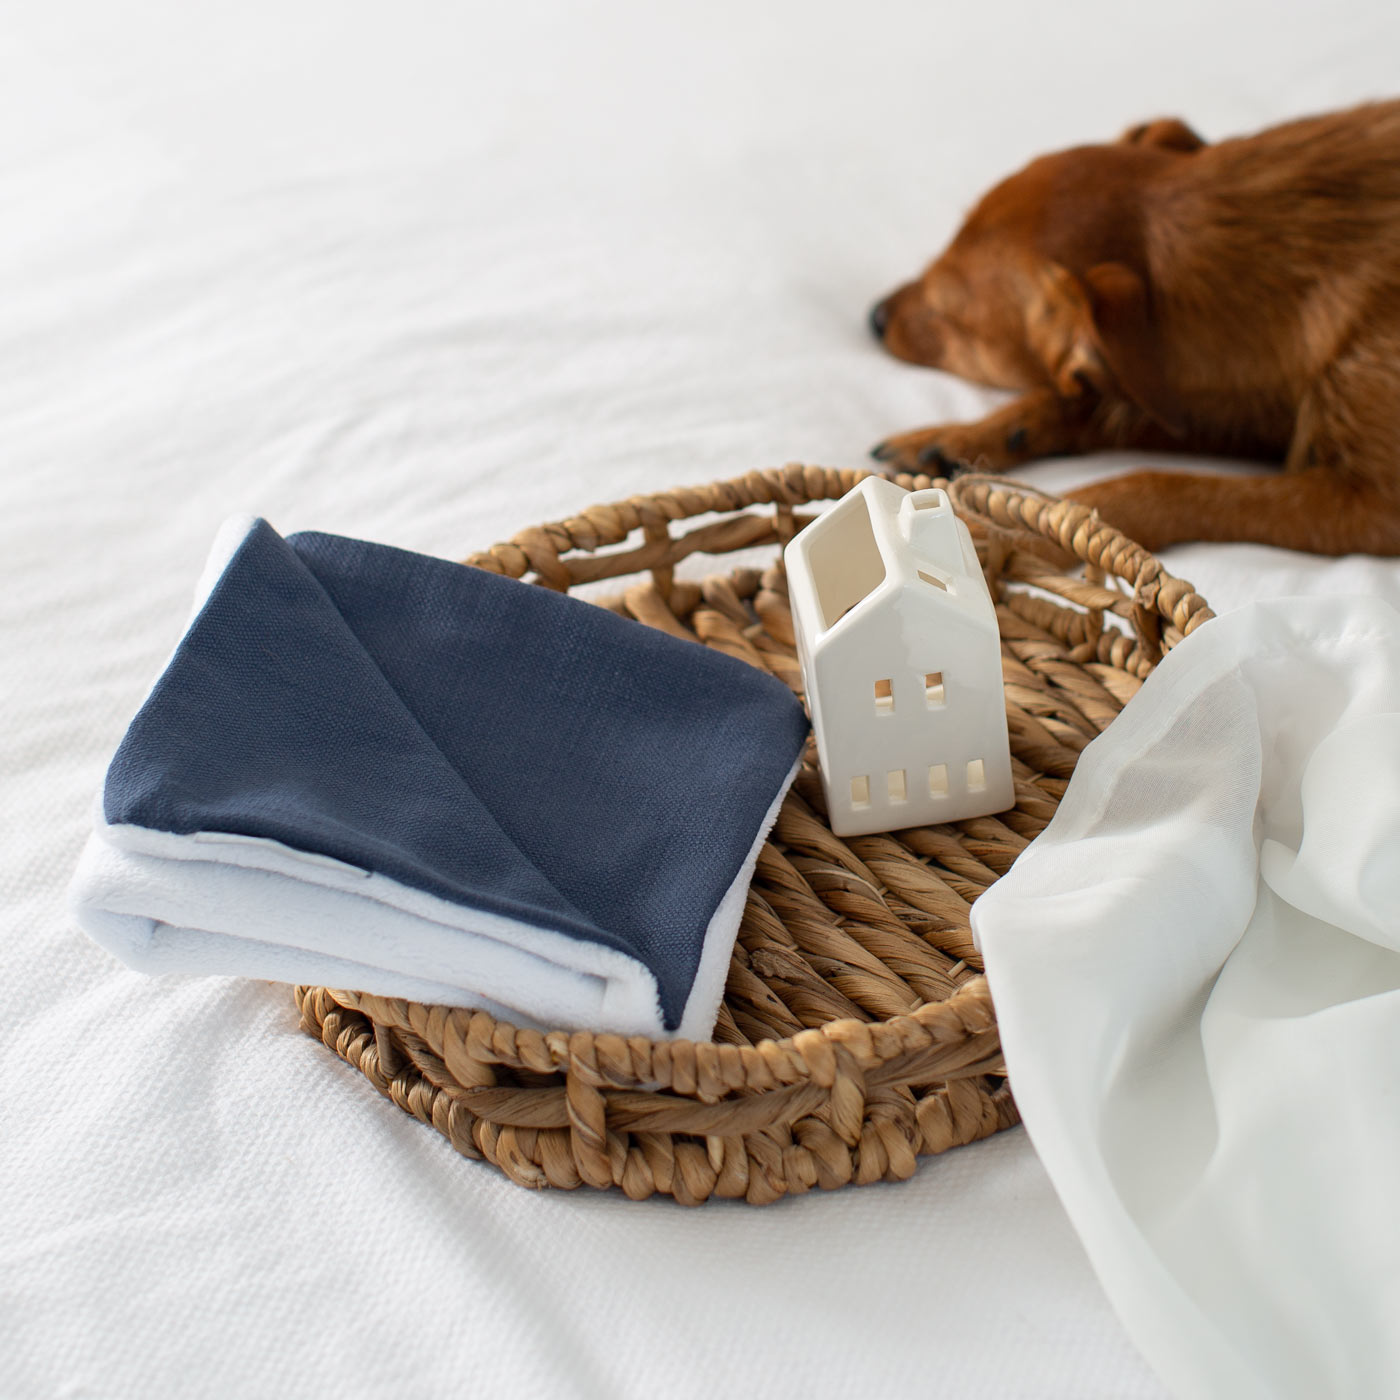 [color:savanna indigo] Luxury Savanna Pet Blanket collection, In Stunning Savanna Indigo. The Perfect Blanket For Dogs, Available at Lords & Labradors US